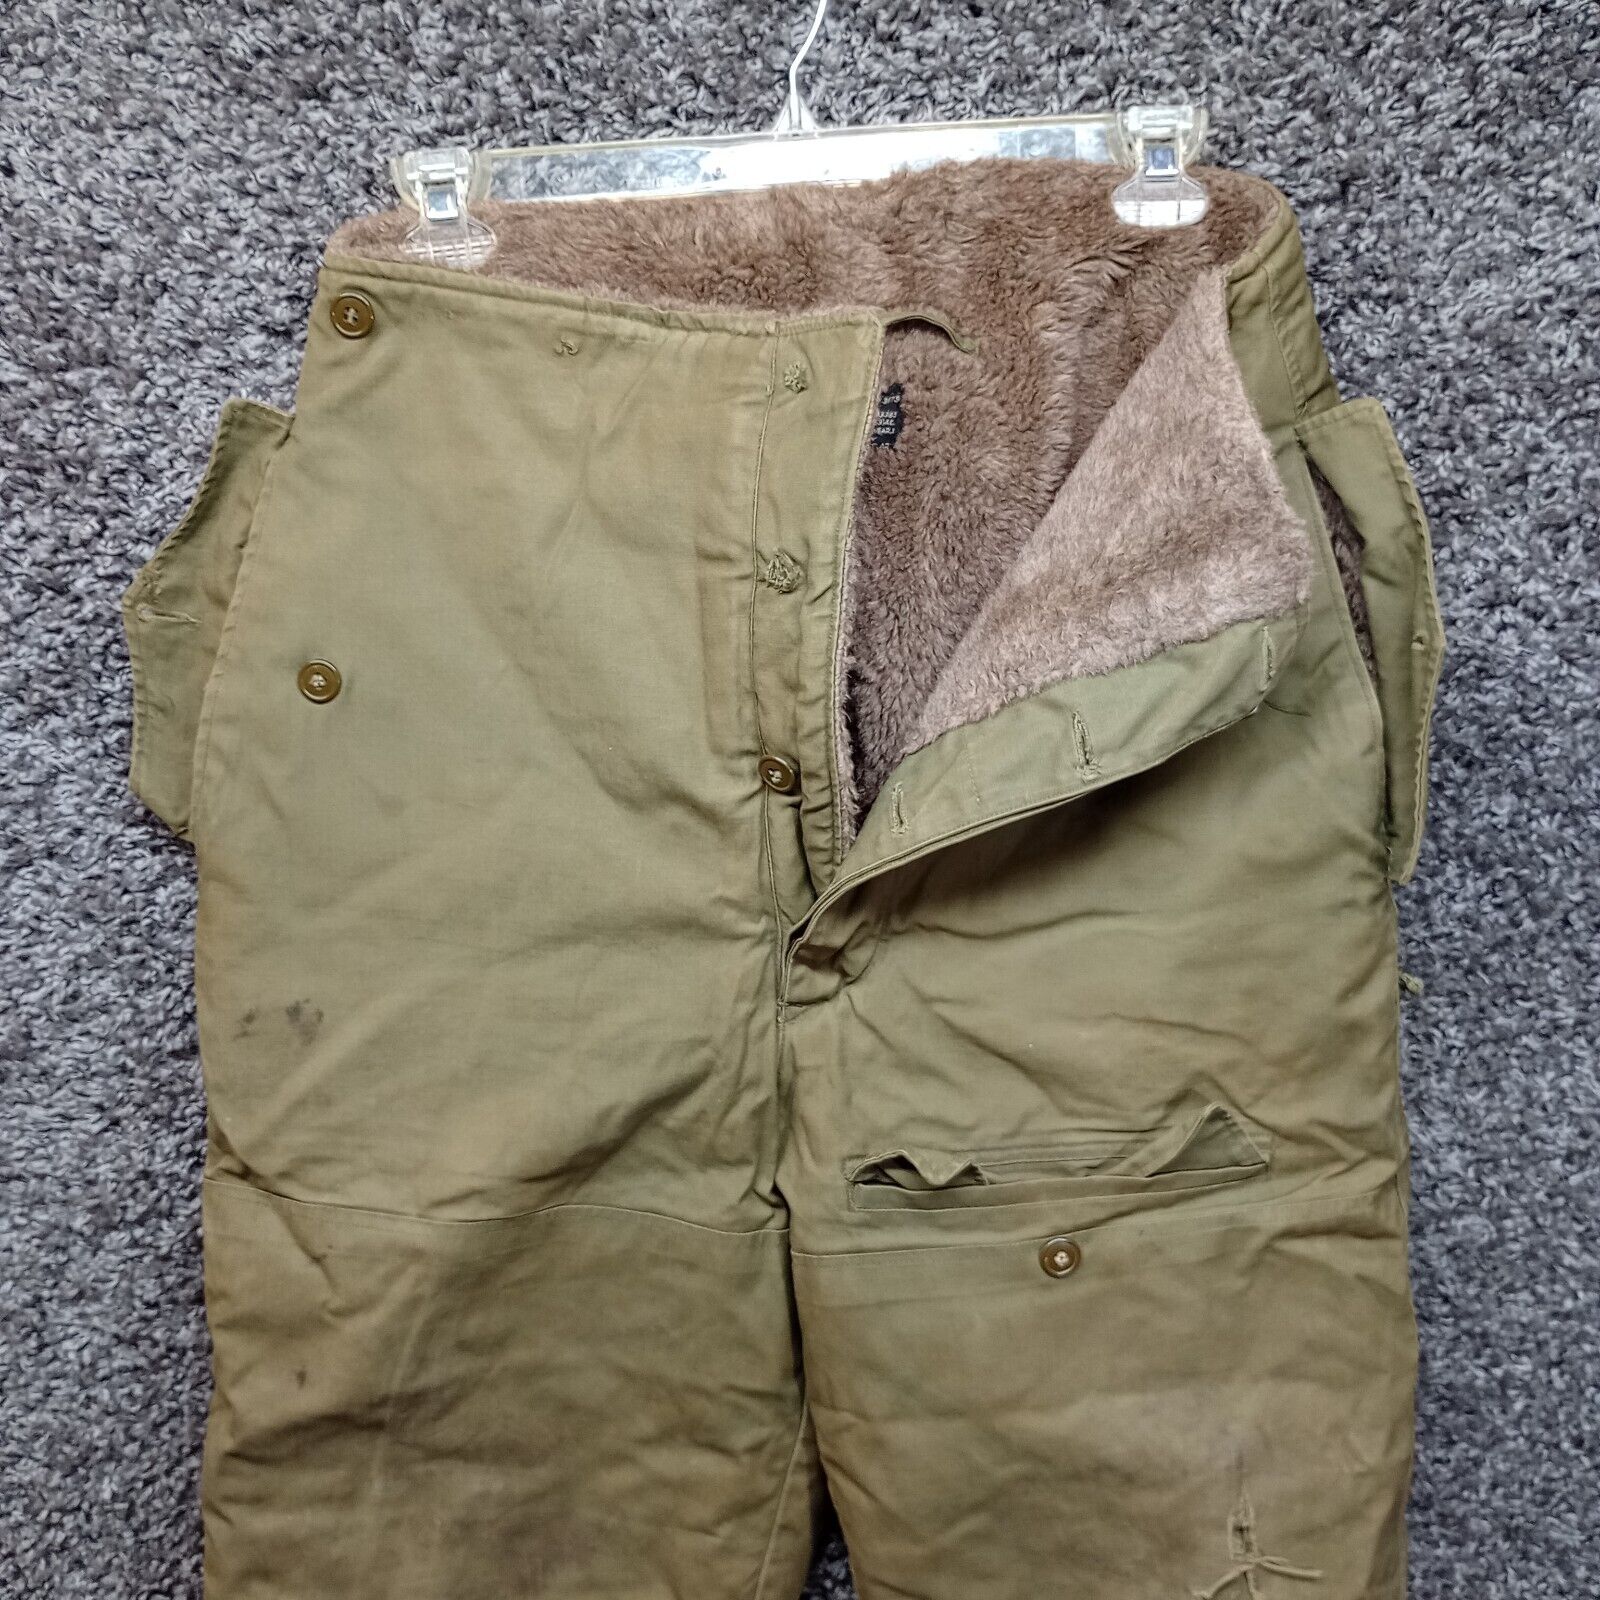 Vintage Rare 1940s US Army Air Force Cold Weather Pants Type A10 A-10 Size 36